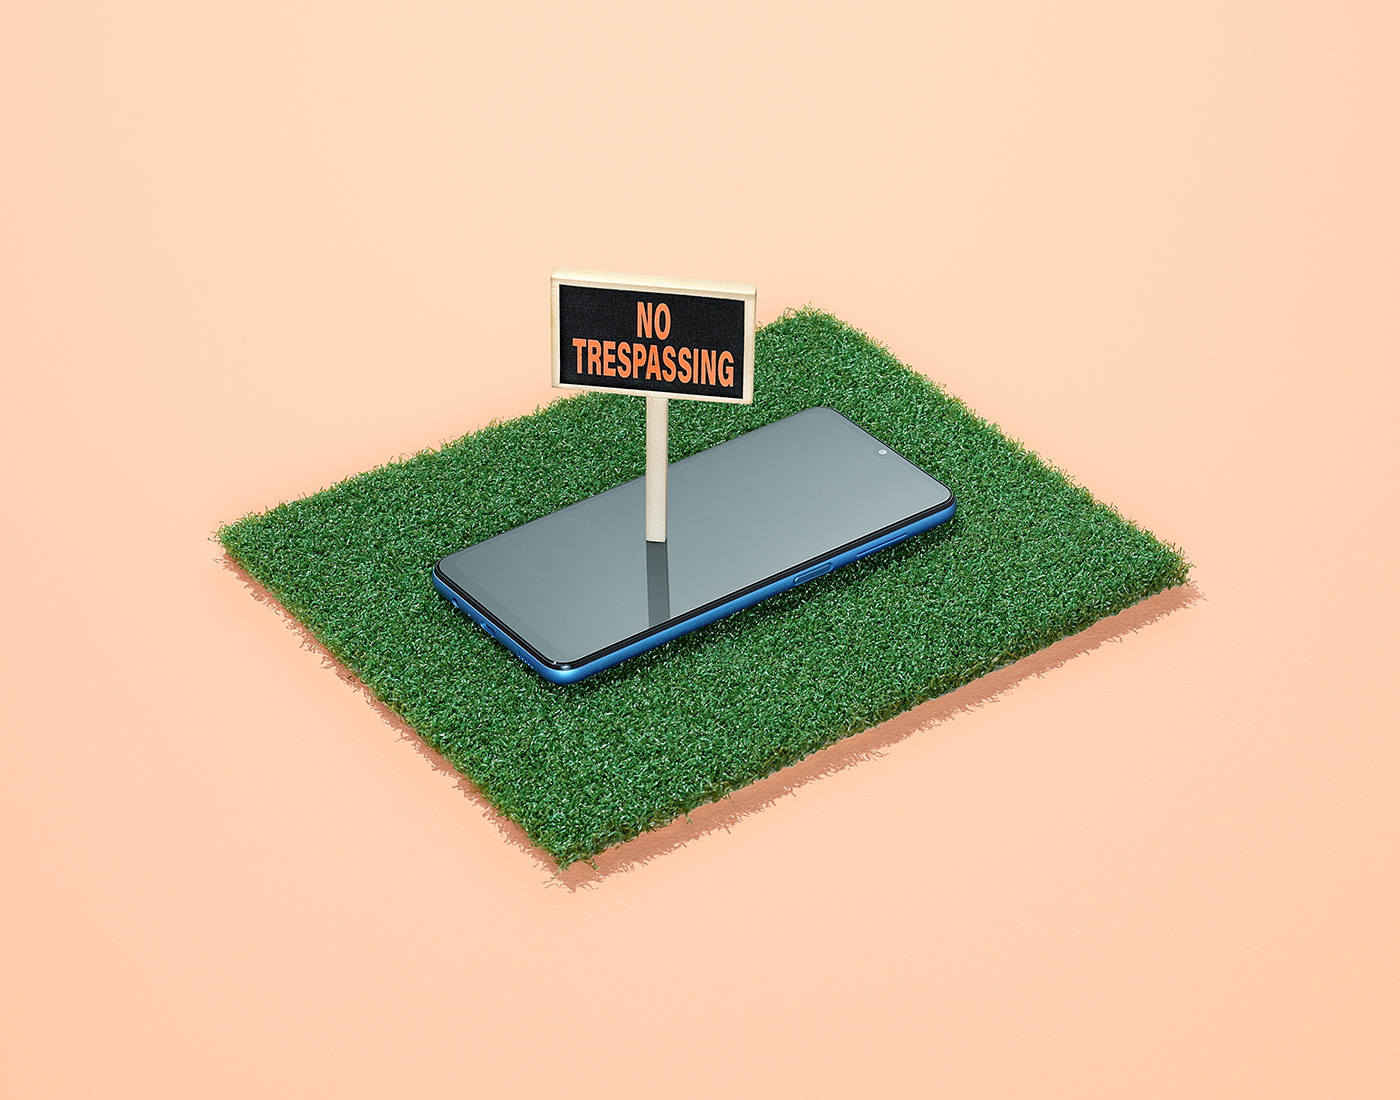 phone on fake lawn with no trespassing sign on it